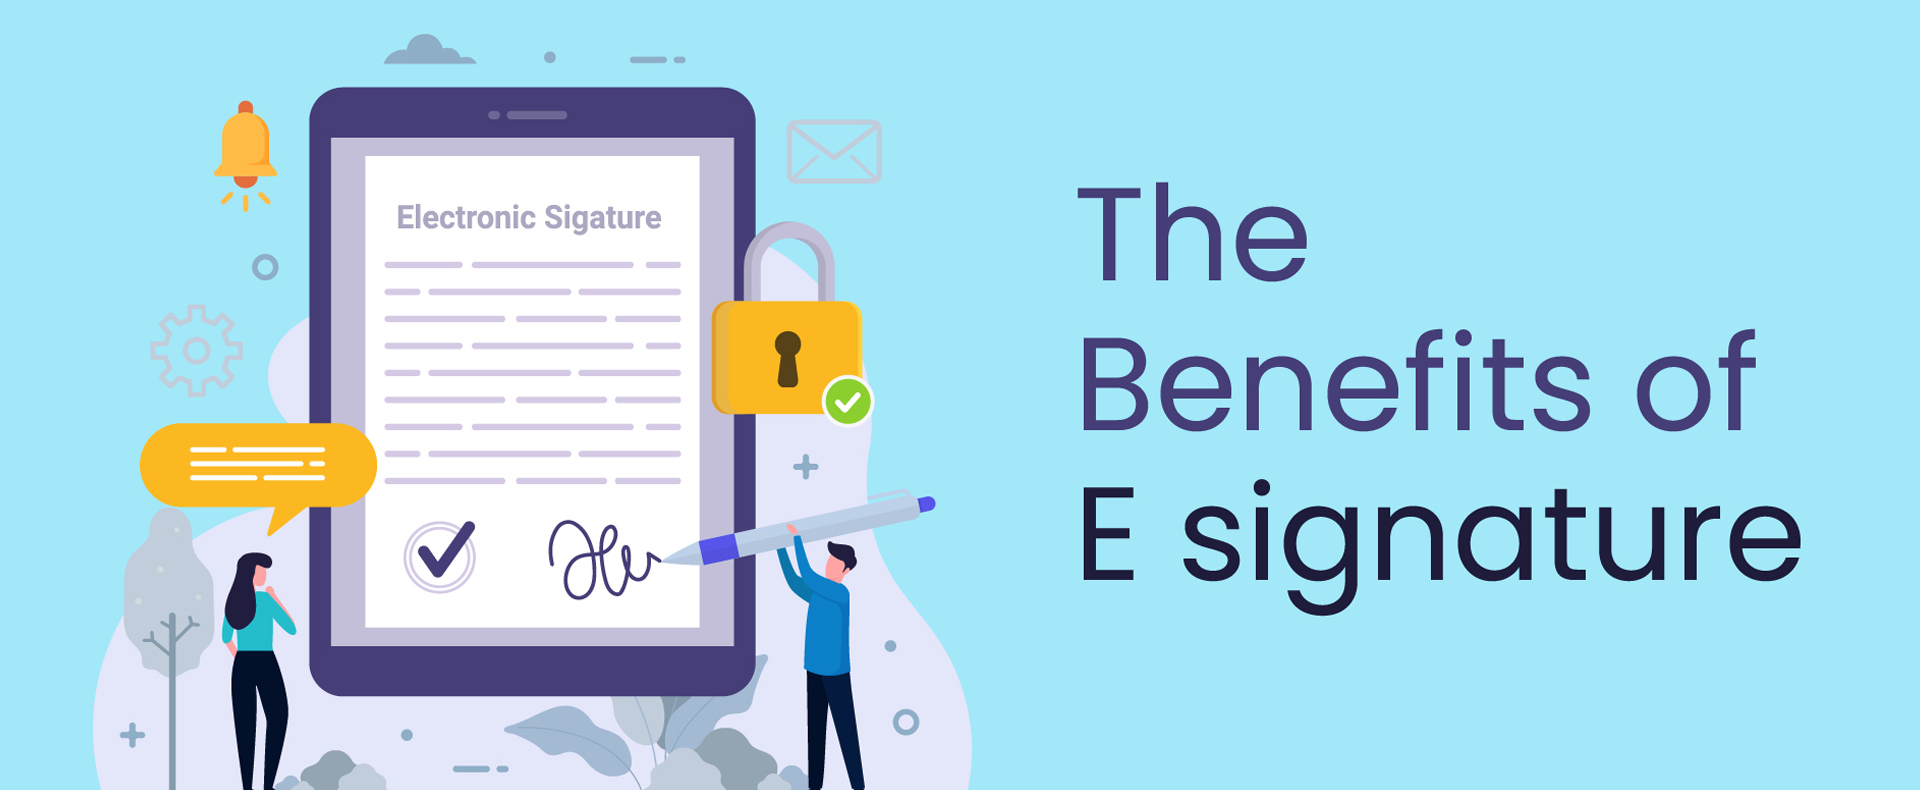 e-signatures-for-document-approval-in-M365-IB2.jpg